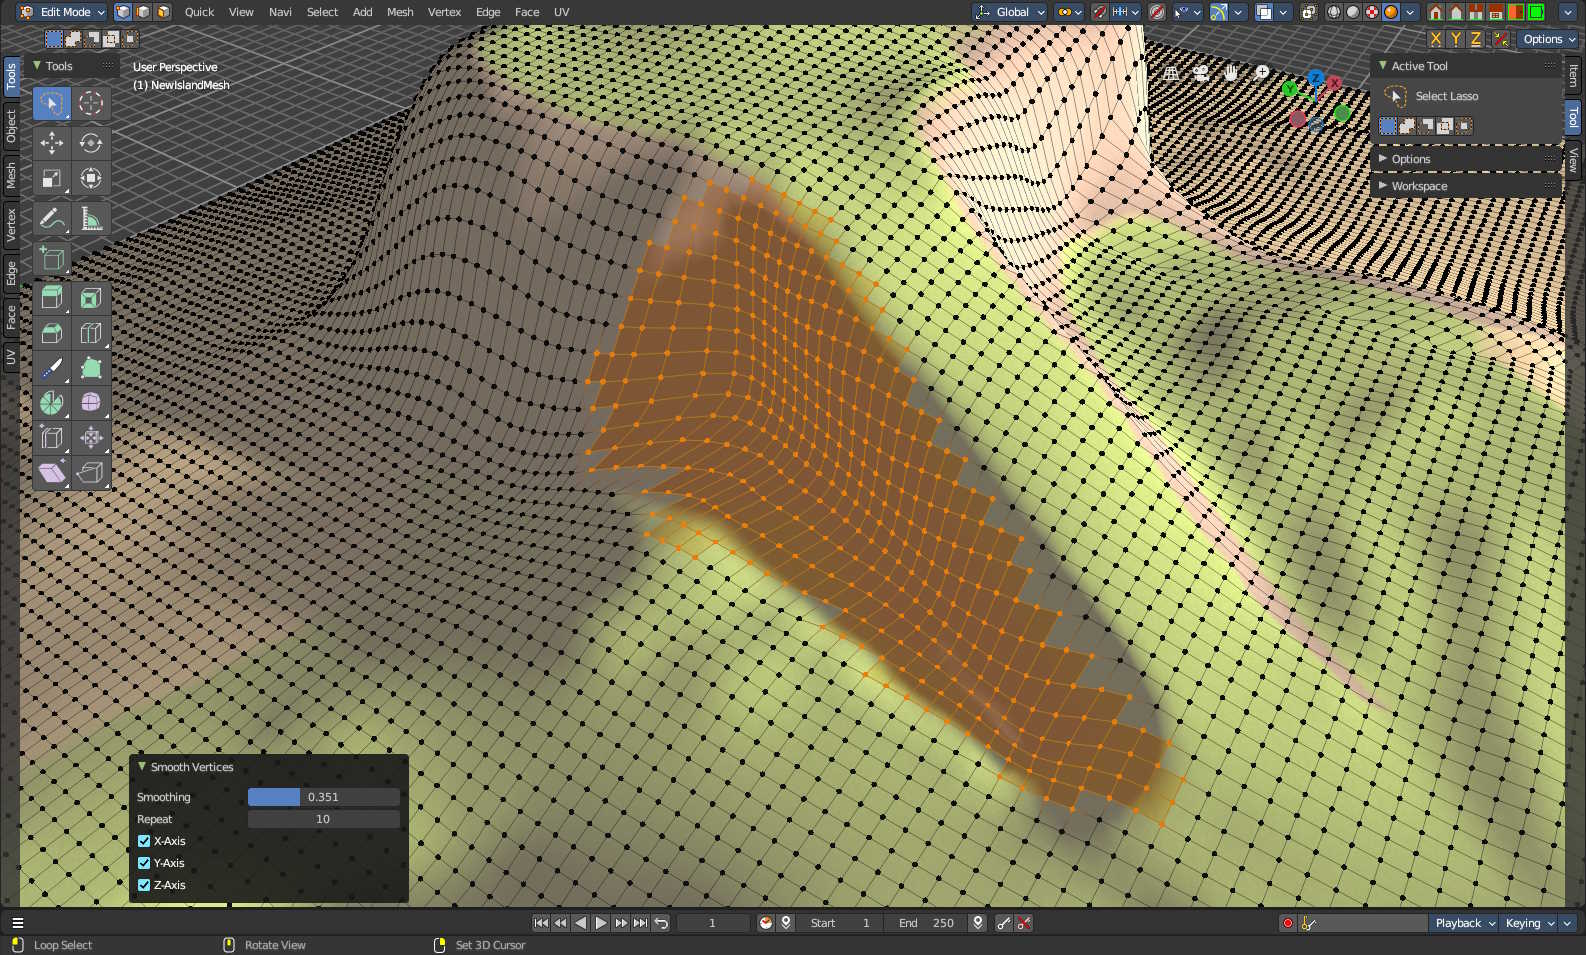 Blender screenshot showing the previous terrain but smoothed.